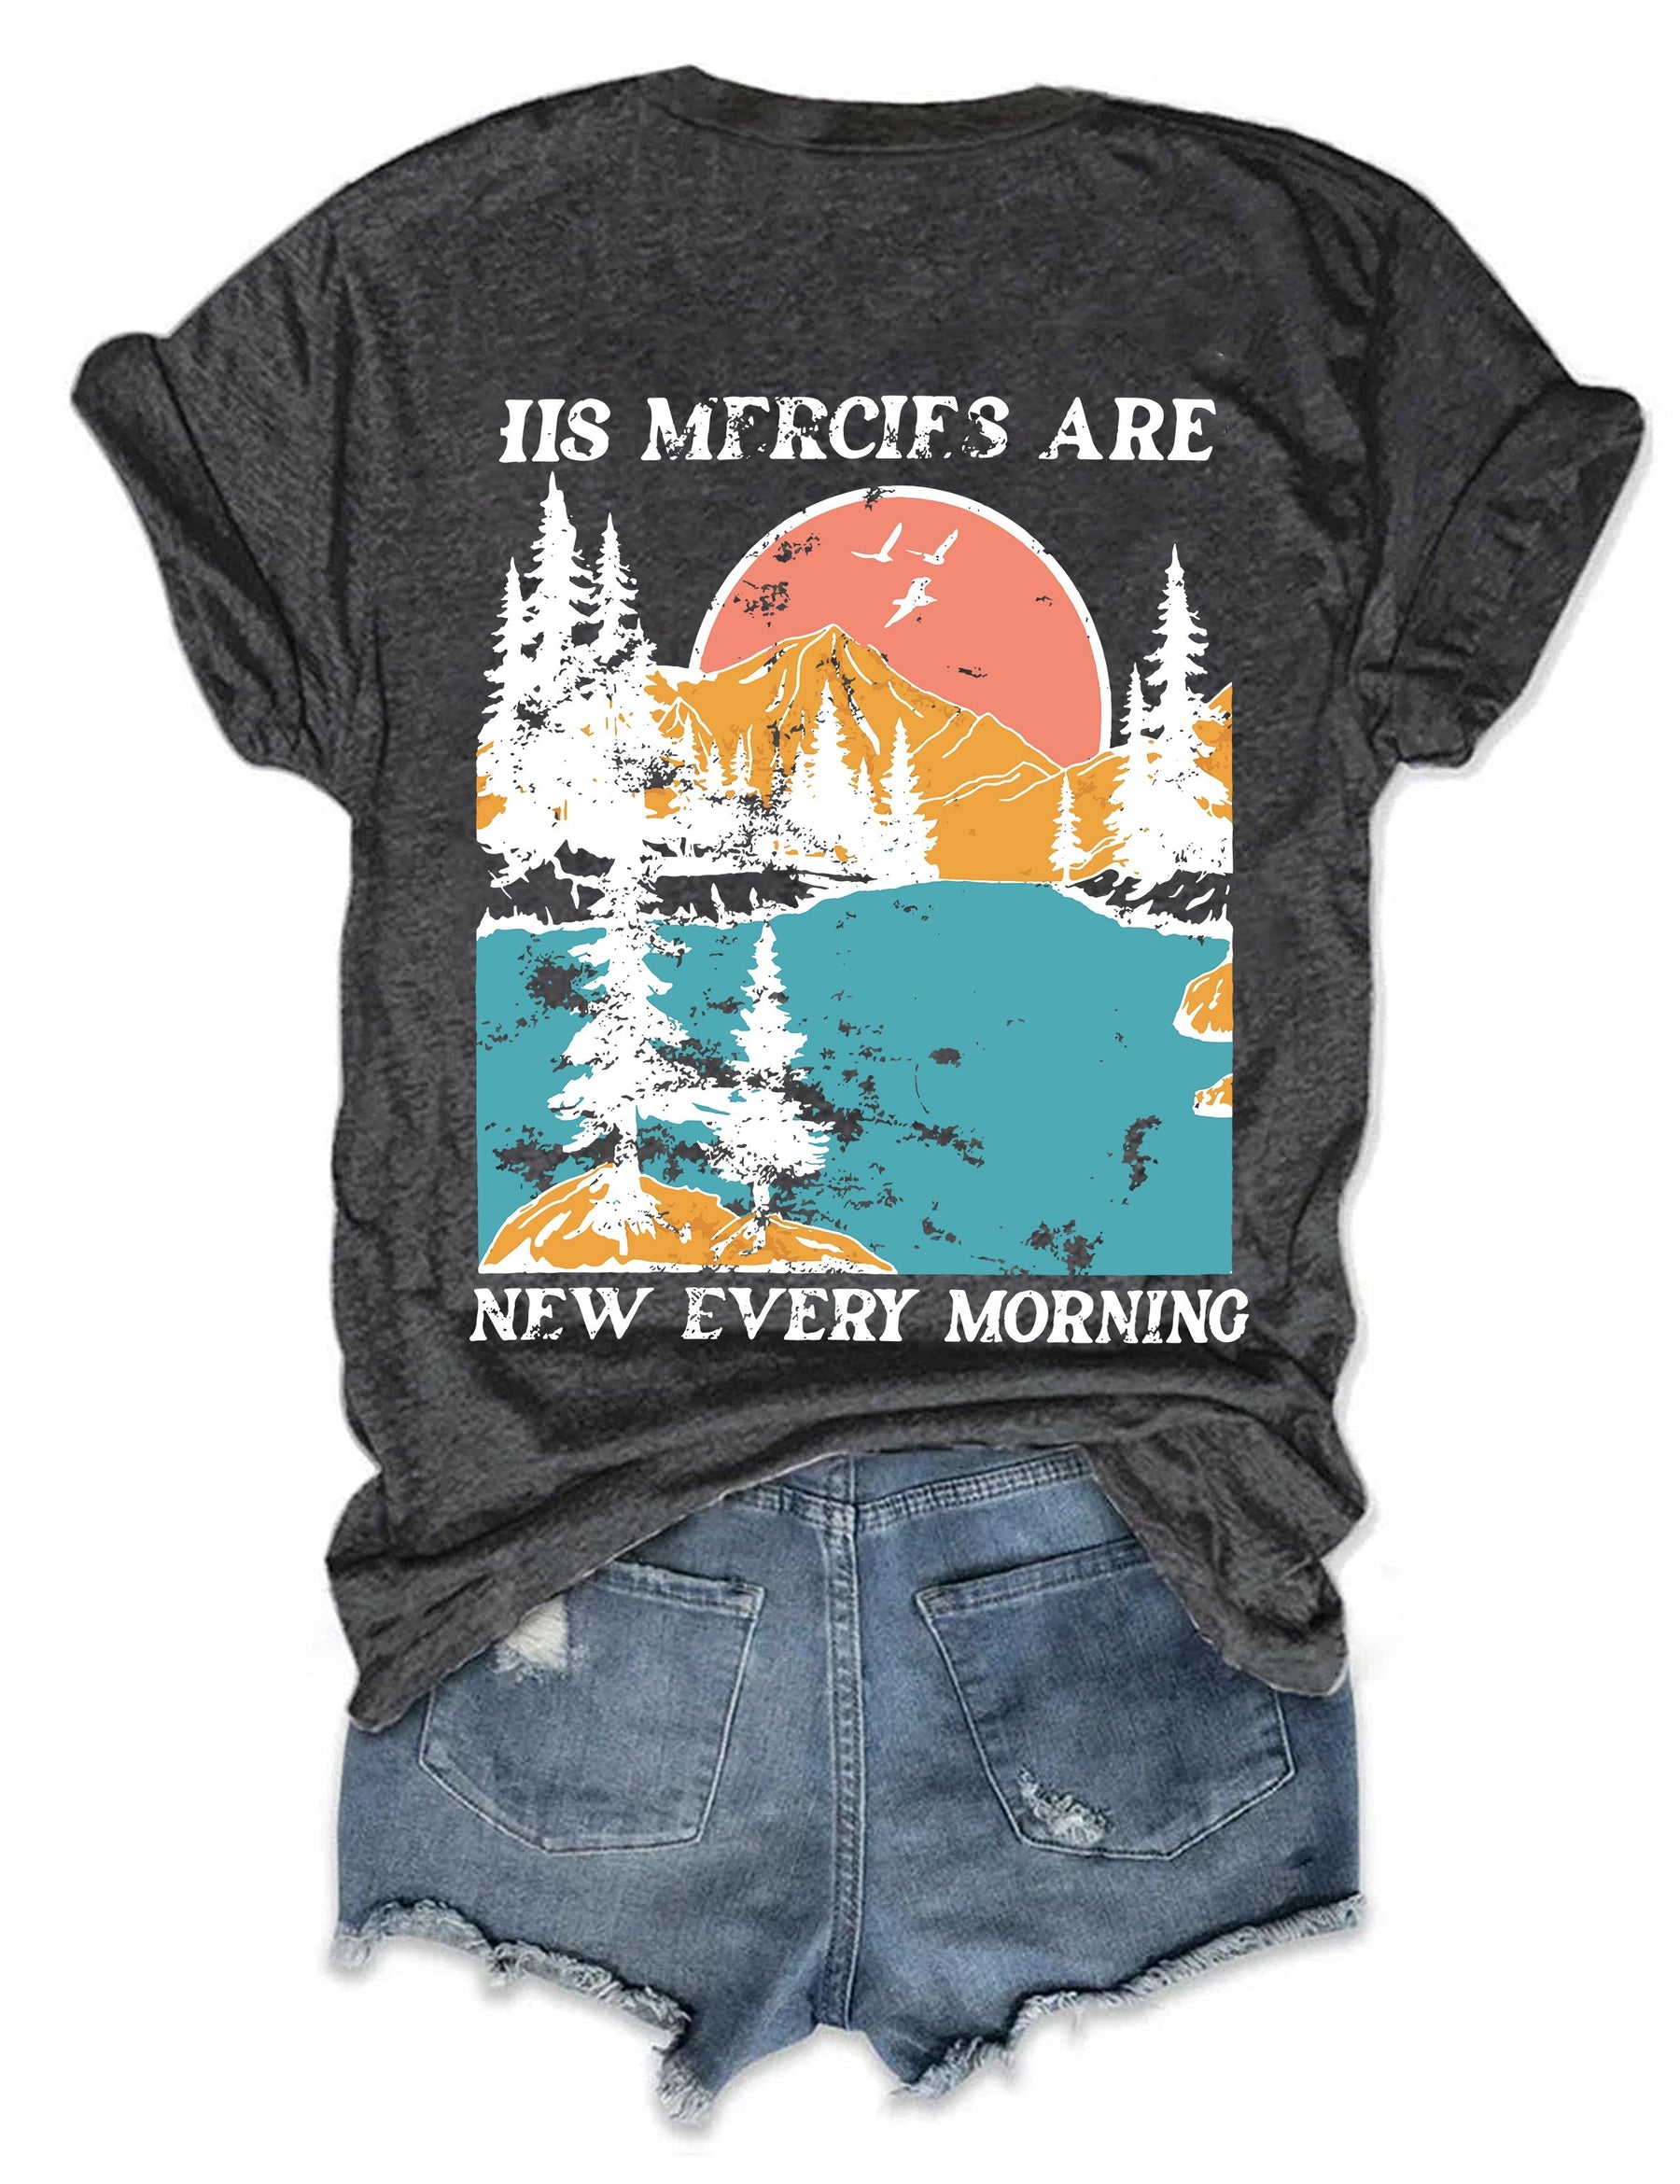 His Mercies Are New Every Morning T-shirt